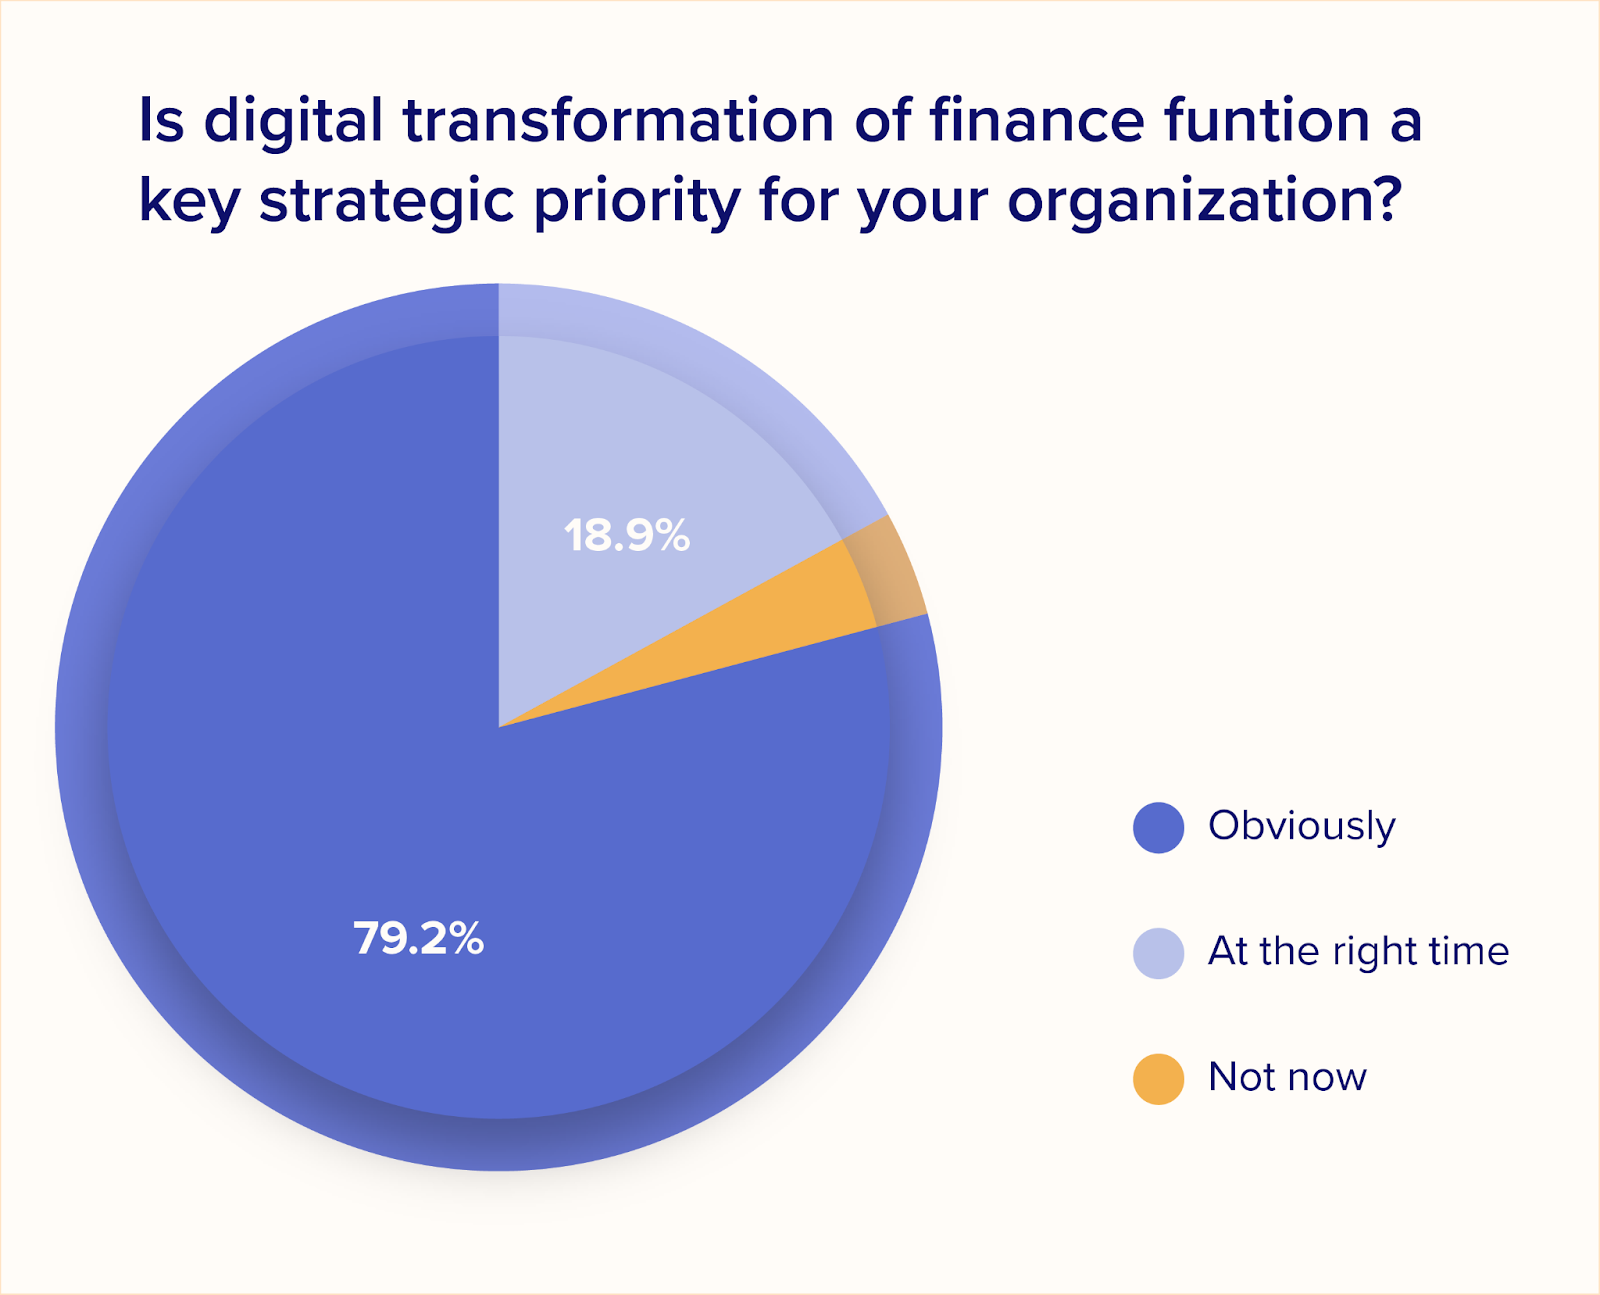 80% of finance leaders across India consider digital transformation a strategic priority